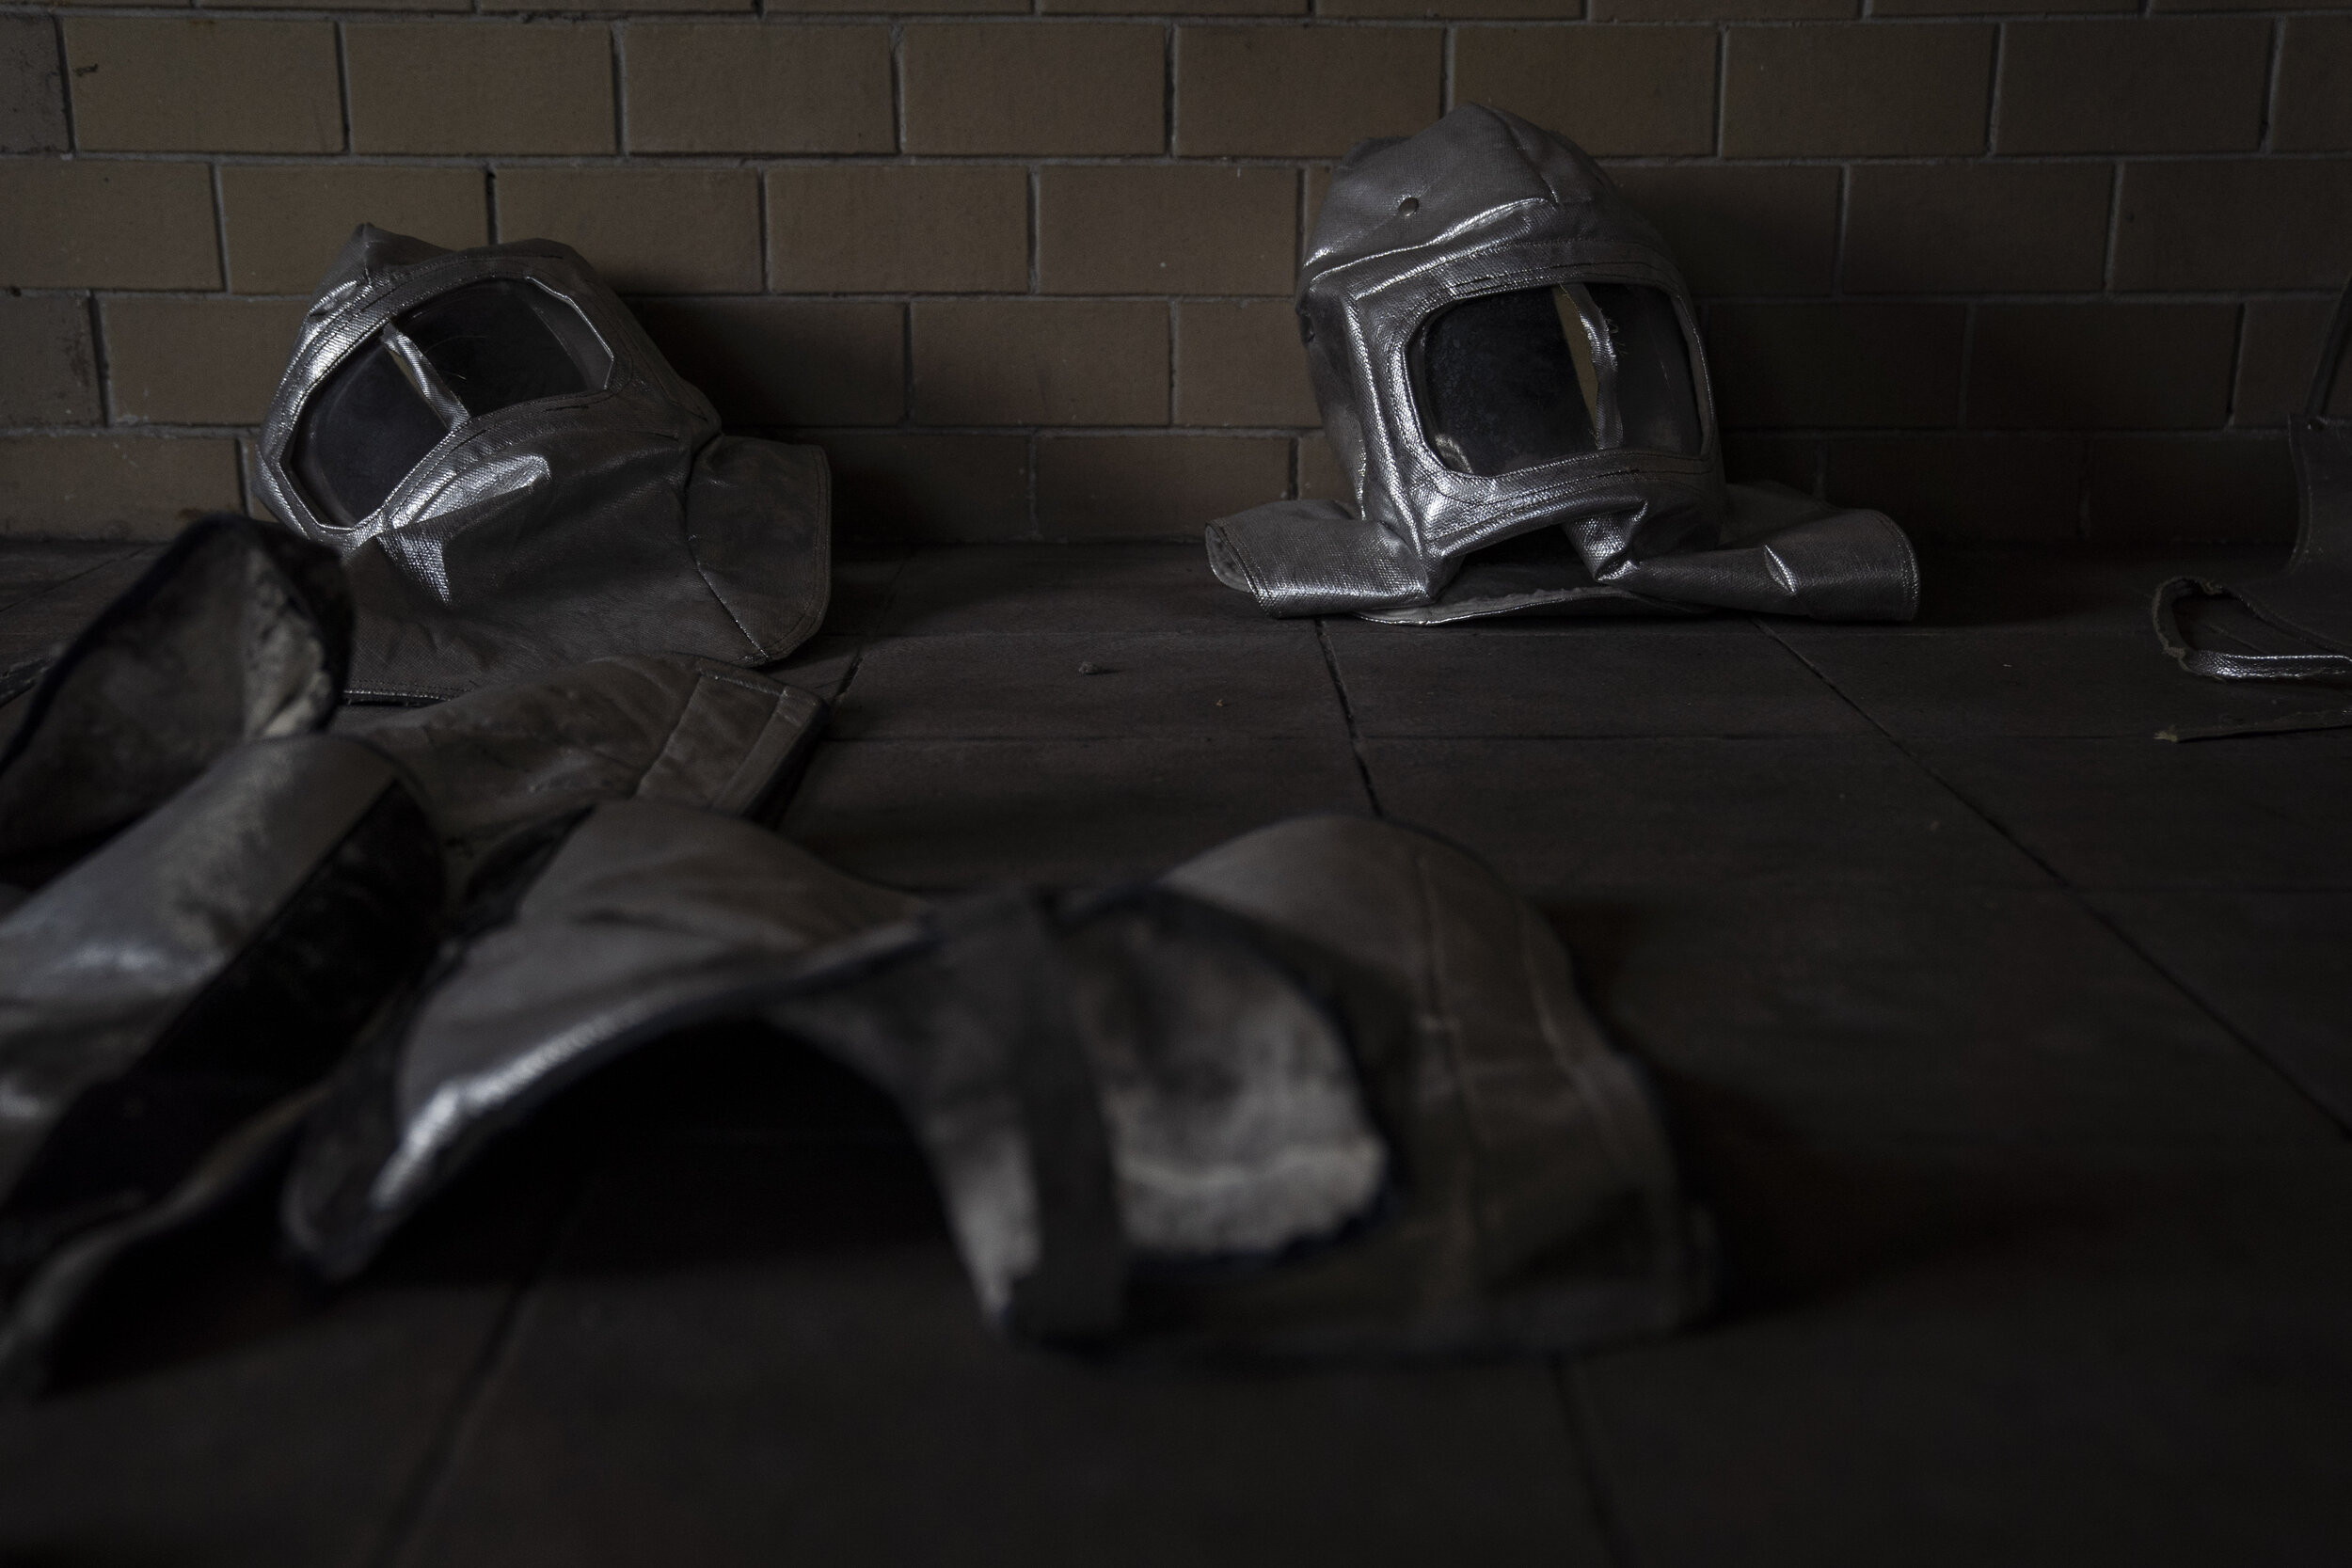   Workers' protective gear wait to be disinfected at a crematorium at Panteon Municipal in Ciudad Nezahualcóyotl.  